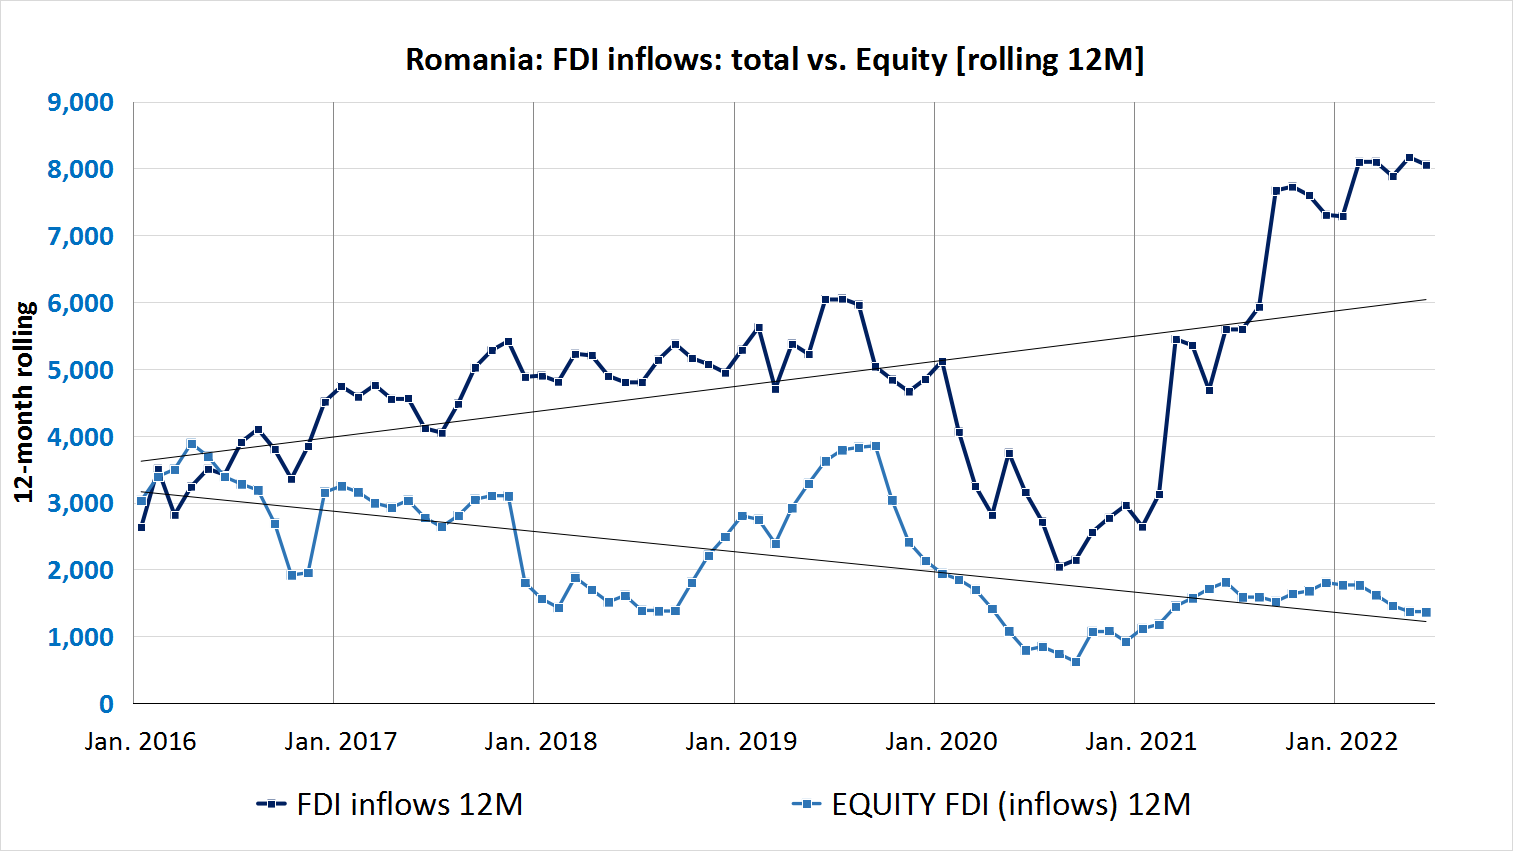 Foreign direct investments in Romania, up 21% in the first half on reinvested earnings